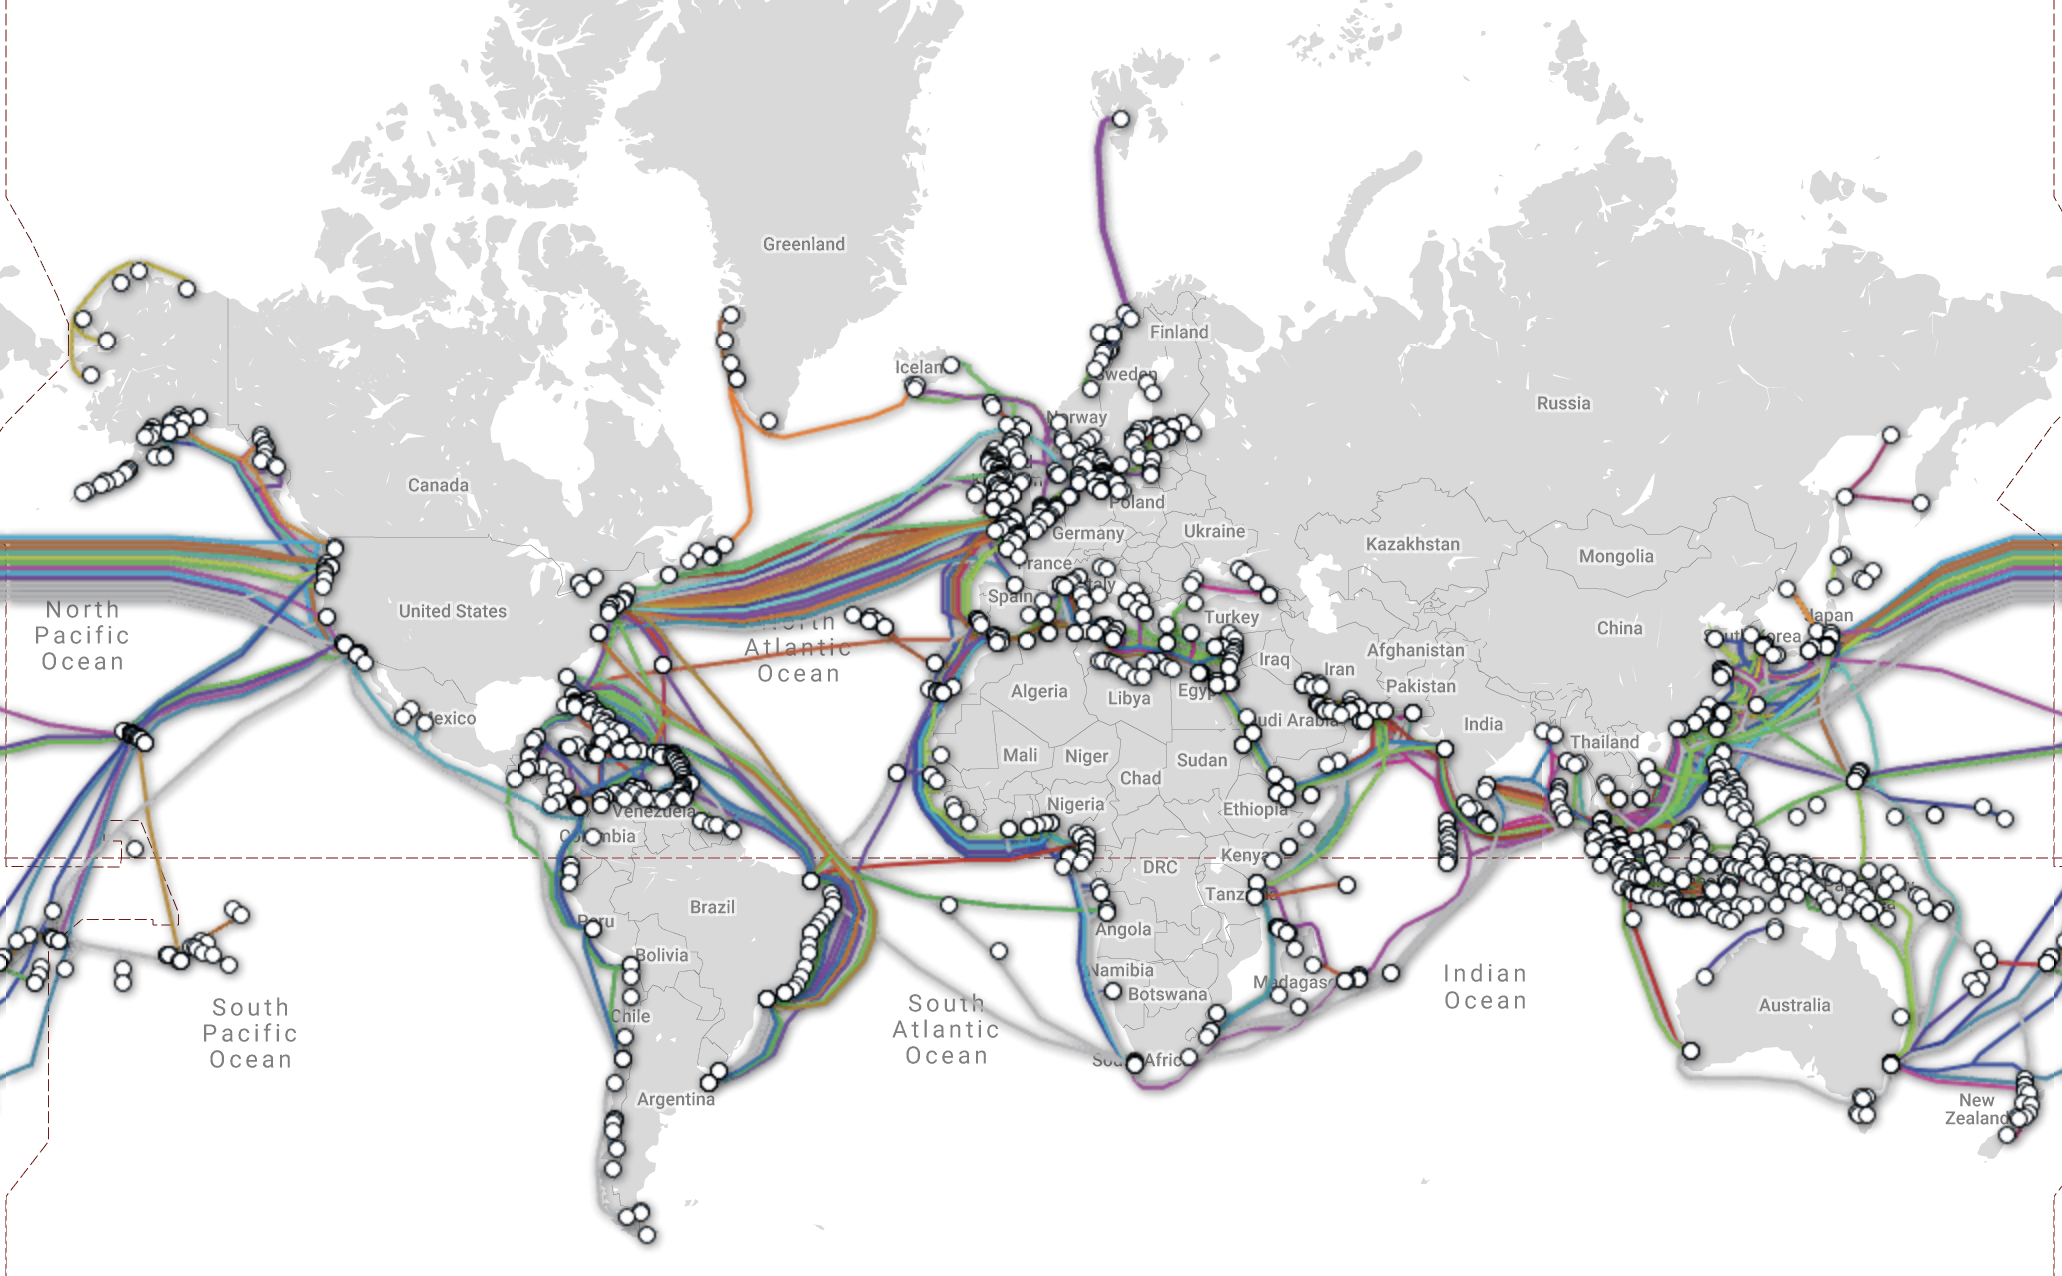 TeleGeography Submarine Cable Map: